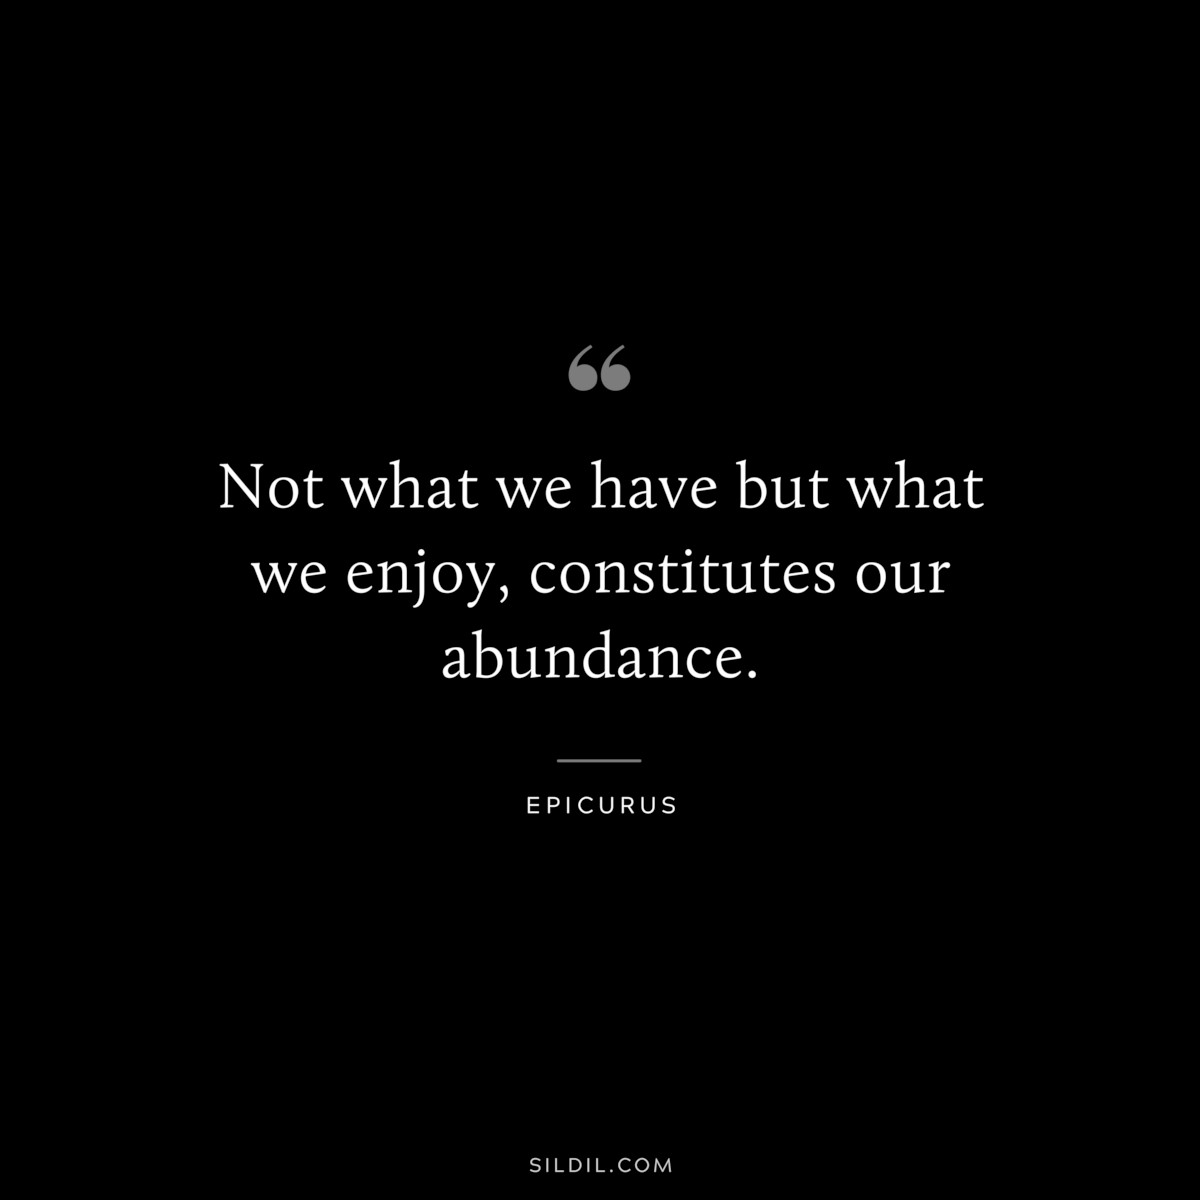 Not what we have but what we enjoy, constitutes our abundance. — Epicurus